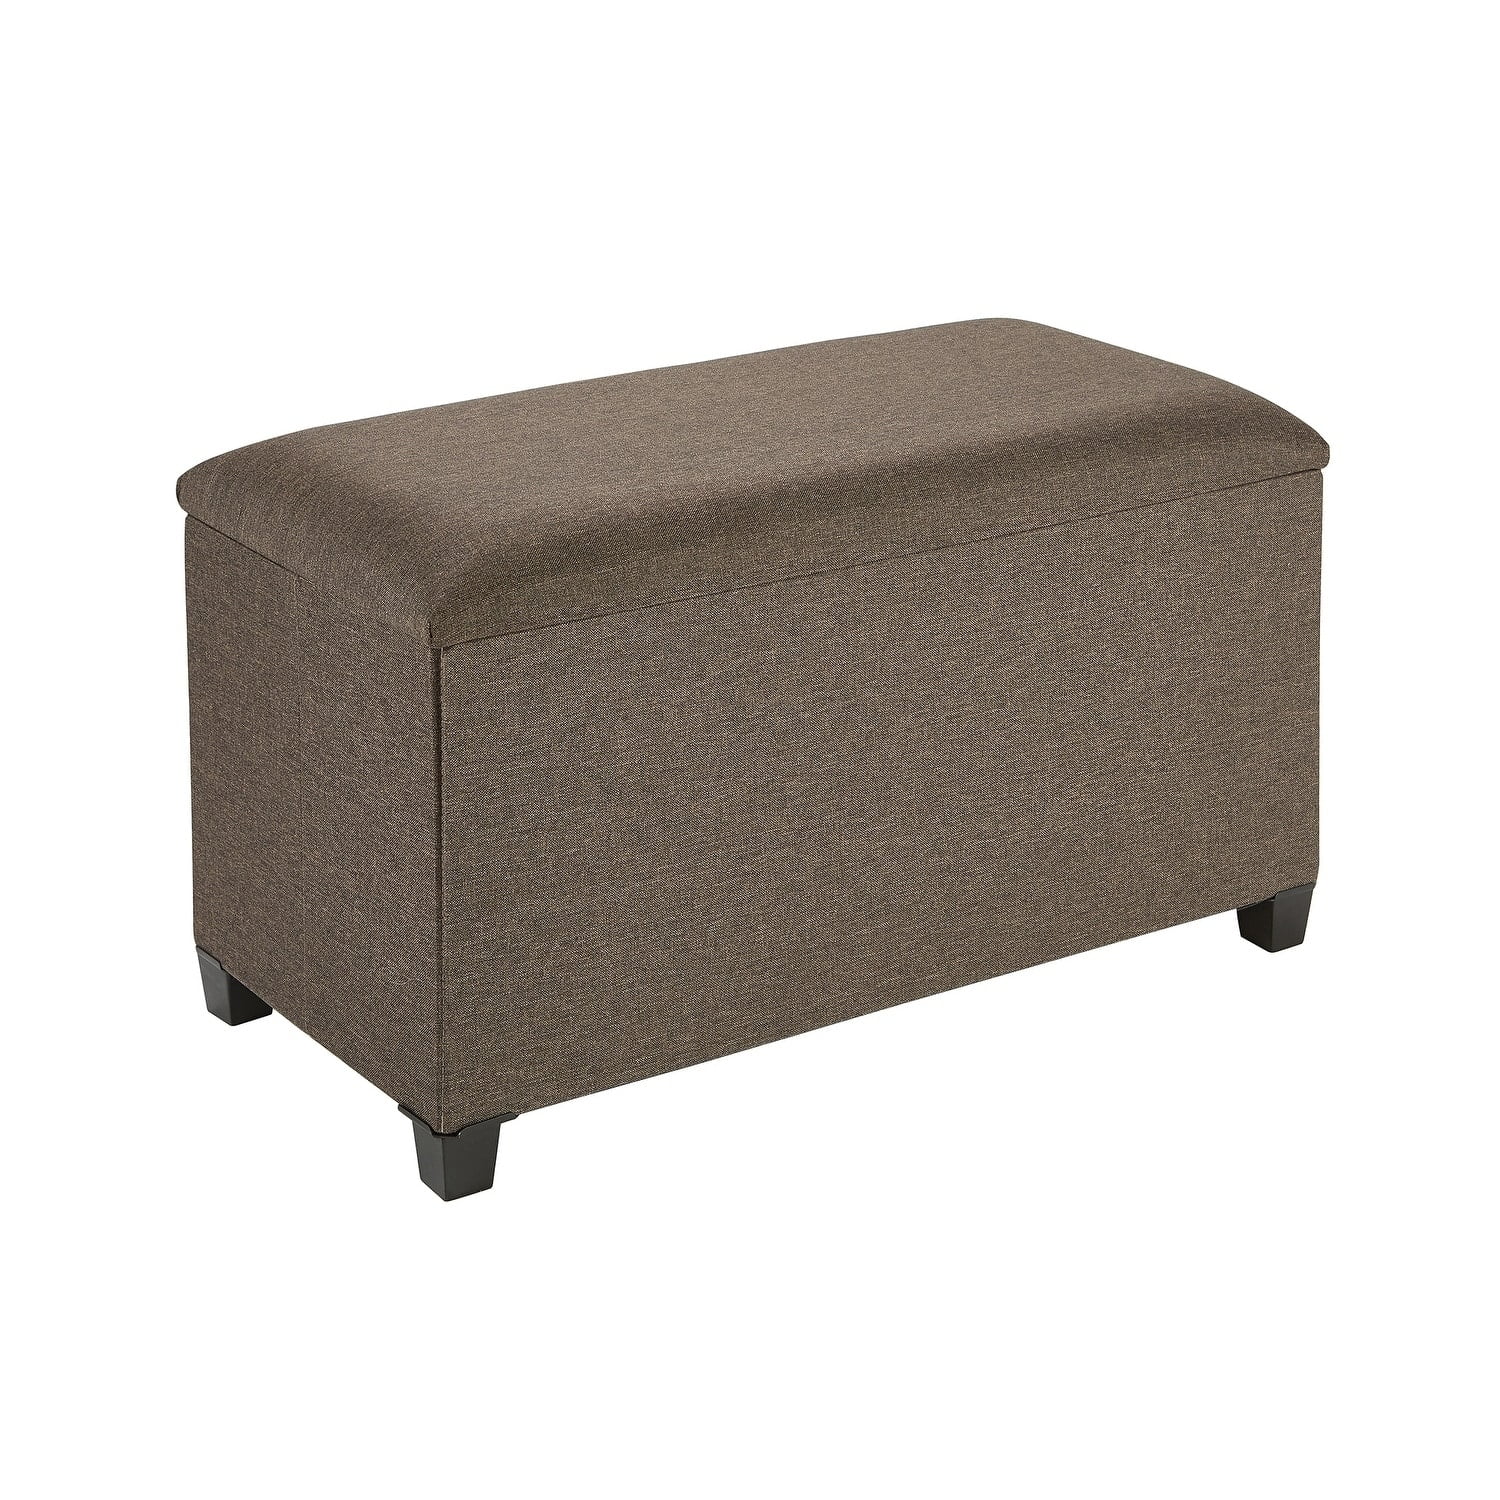 Brown Microsuede Fabric Easy Transformation for Extra Storage Fresh Home Elements FHE 30” Folding Ottoman Bench Seating and Foot Rest Guests 30 x 15 x 15 Family